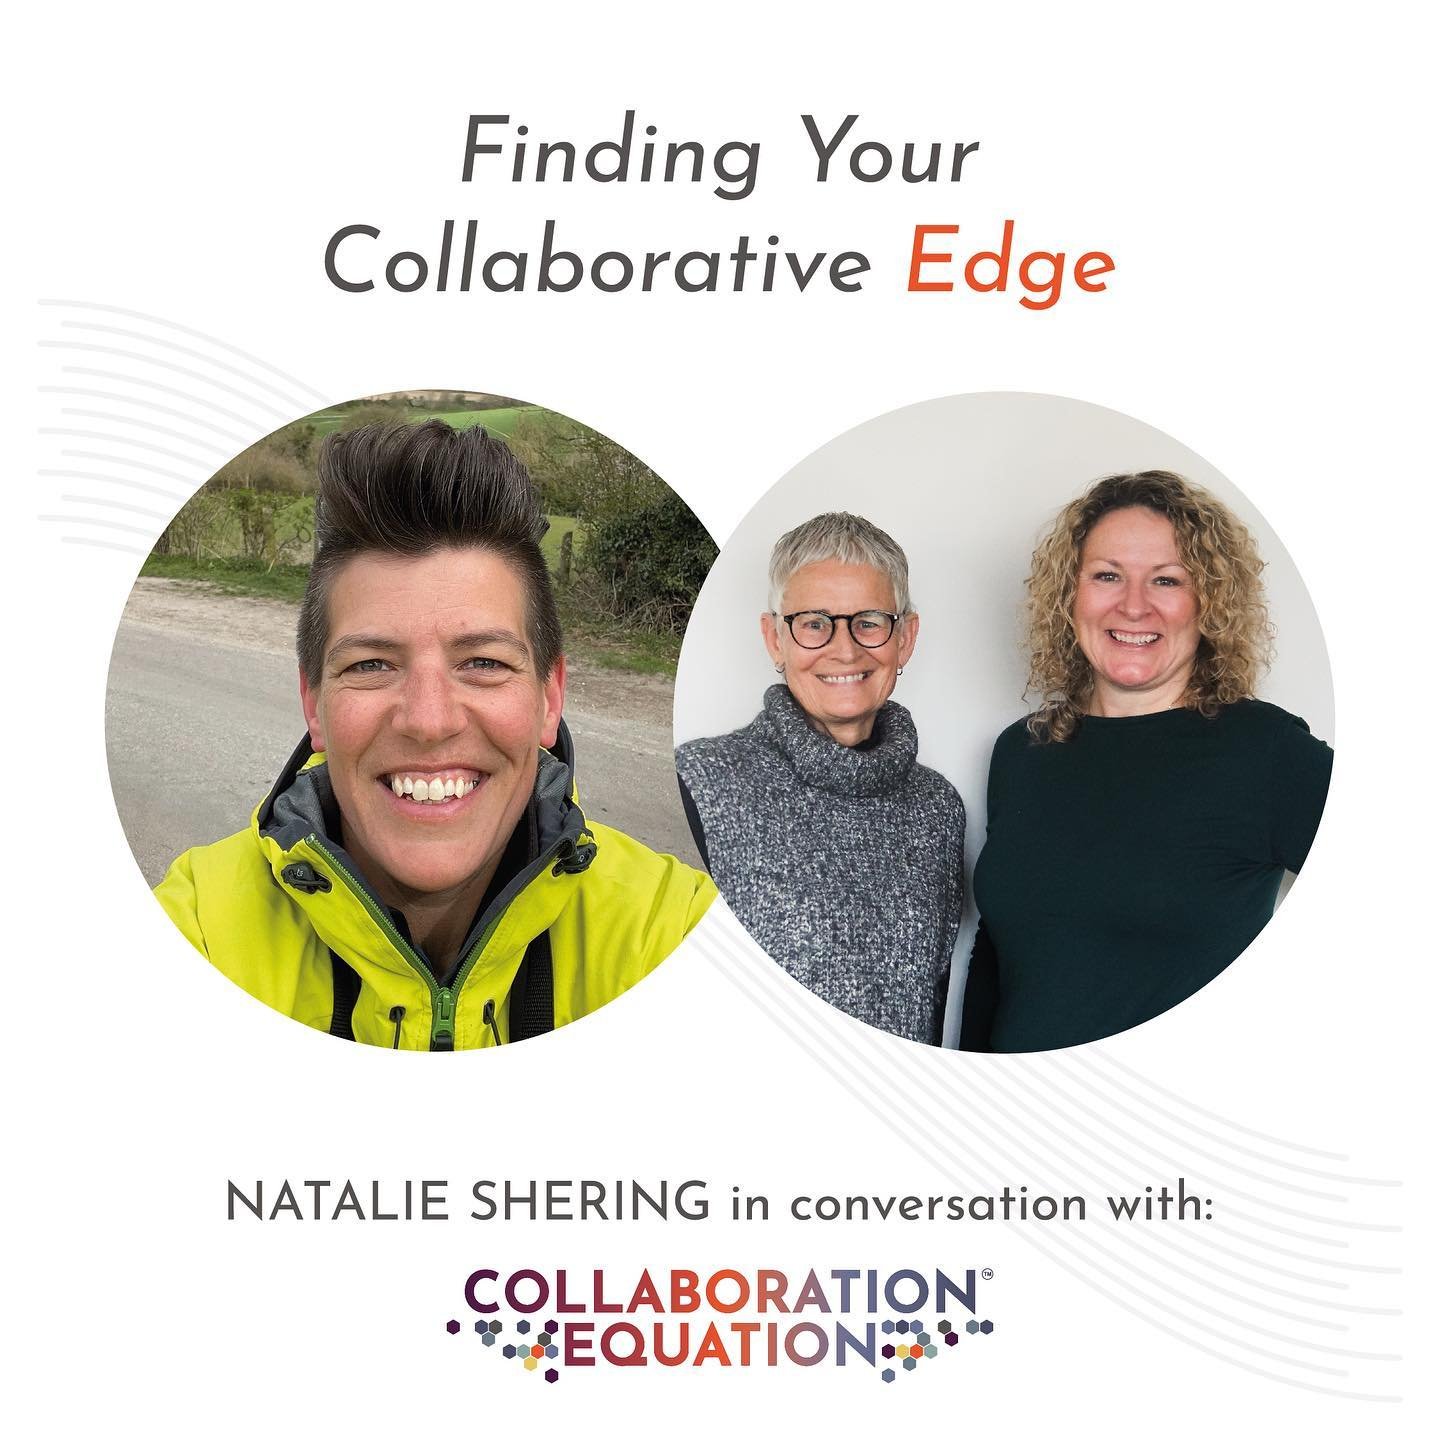 Special Episode!

On today&rsquo;s aired episode of Leaders in Conversation with Anni Townend, I am on the other side of the microphone.

Joining me in conversation is my dear friend Lucy Kidd, with whom I have created Collaboration EquationTM, our u